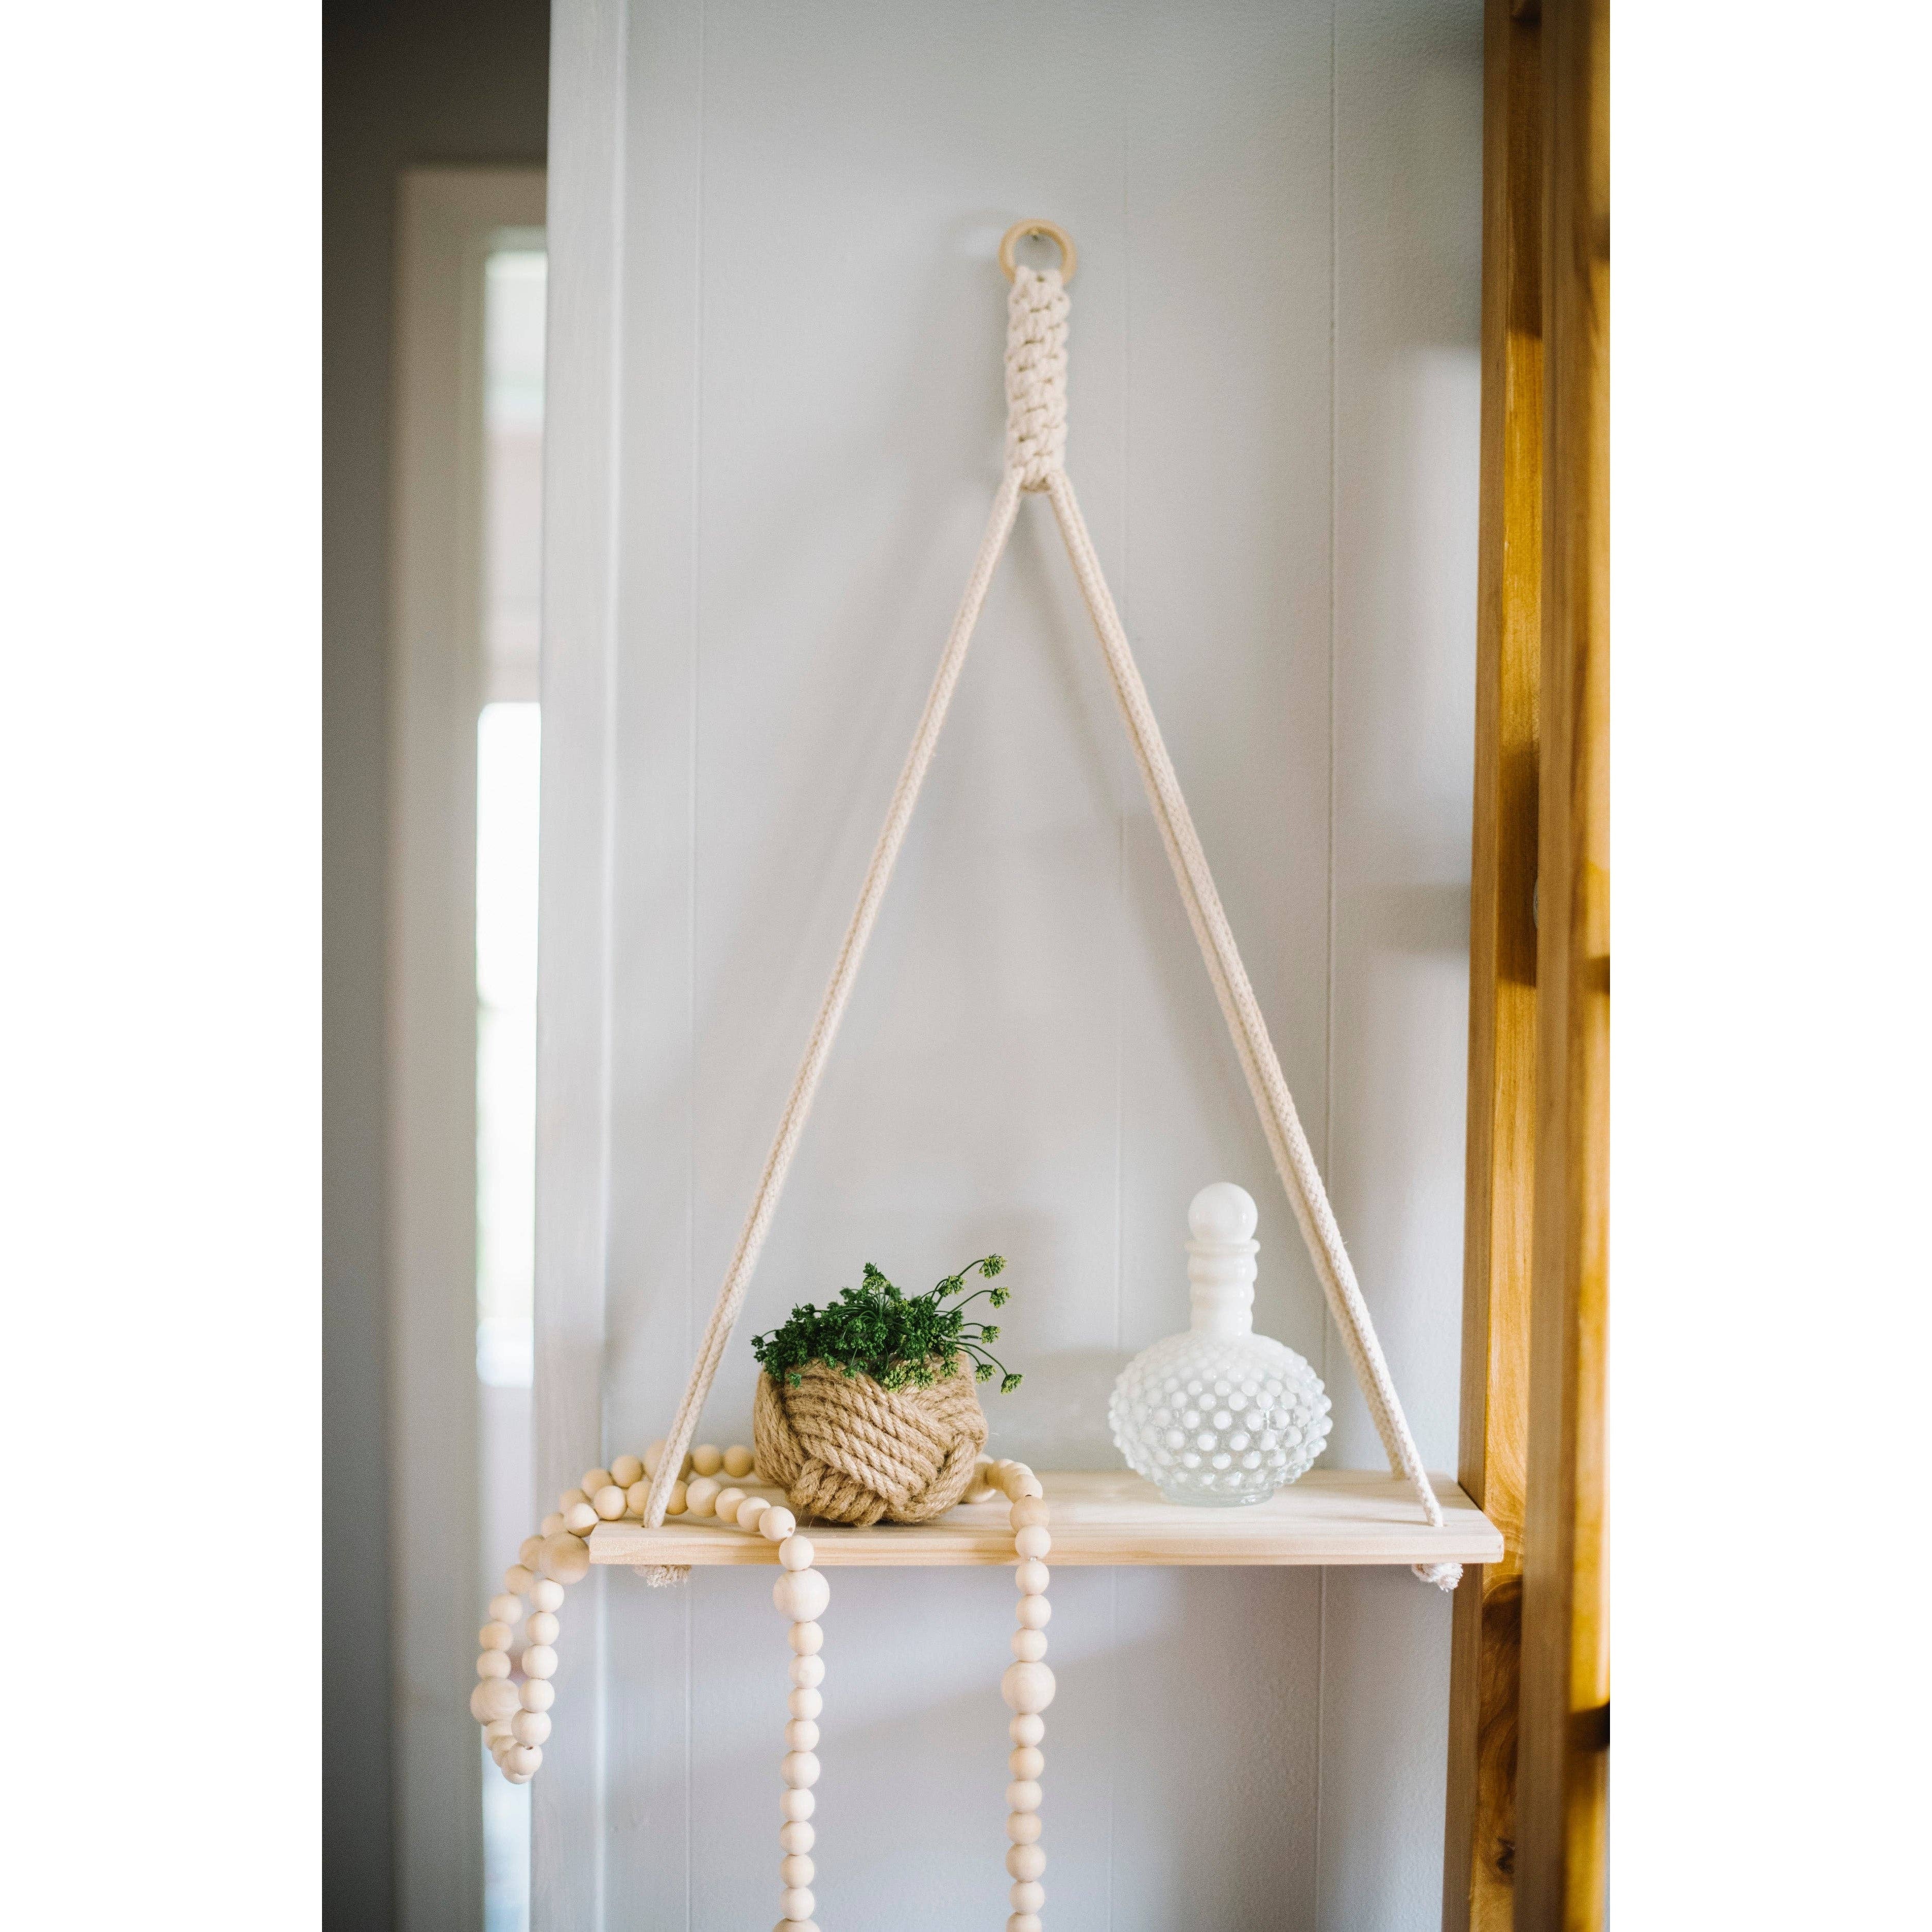 The Dignity Hanging Shelf